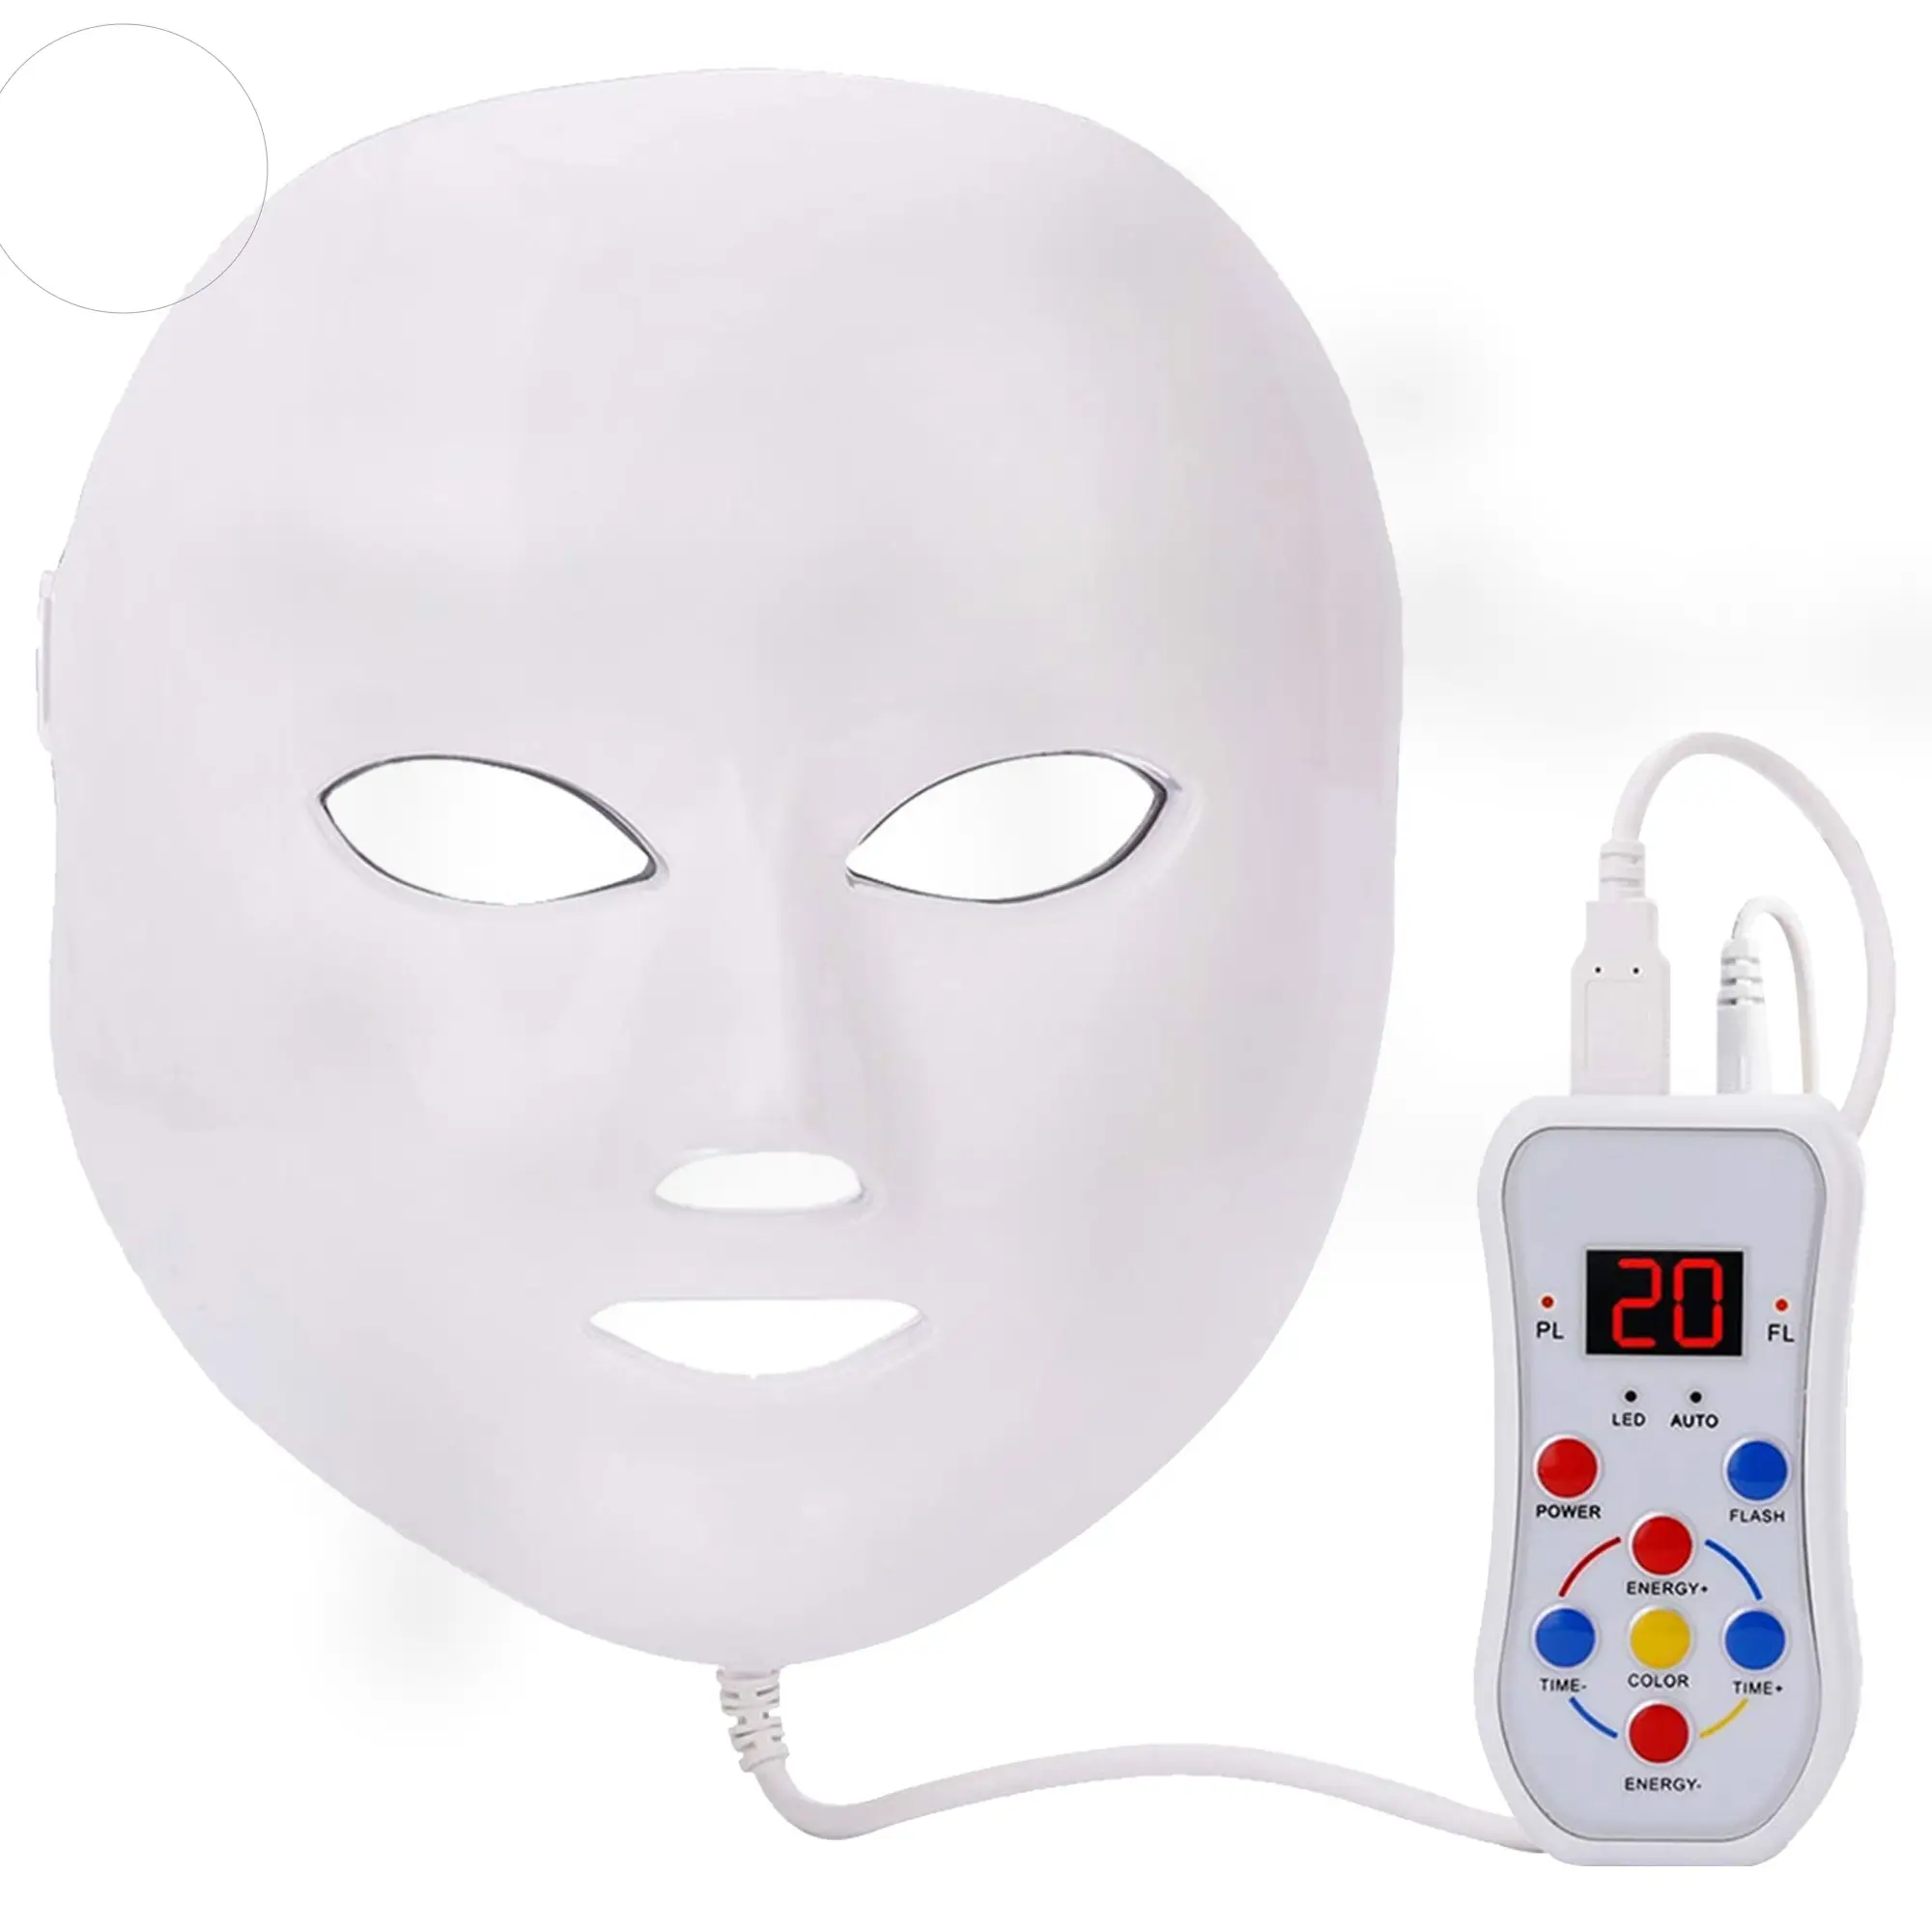 Led Facial m ask Light Therapy Skin Rejuvenation 7 Colors Led Phototherapy Facial Skin Rejuvenation Wrinkle Remover